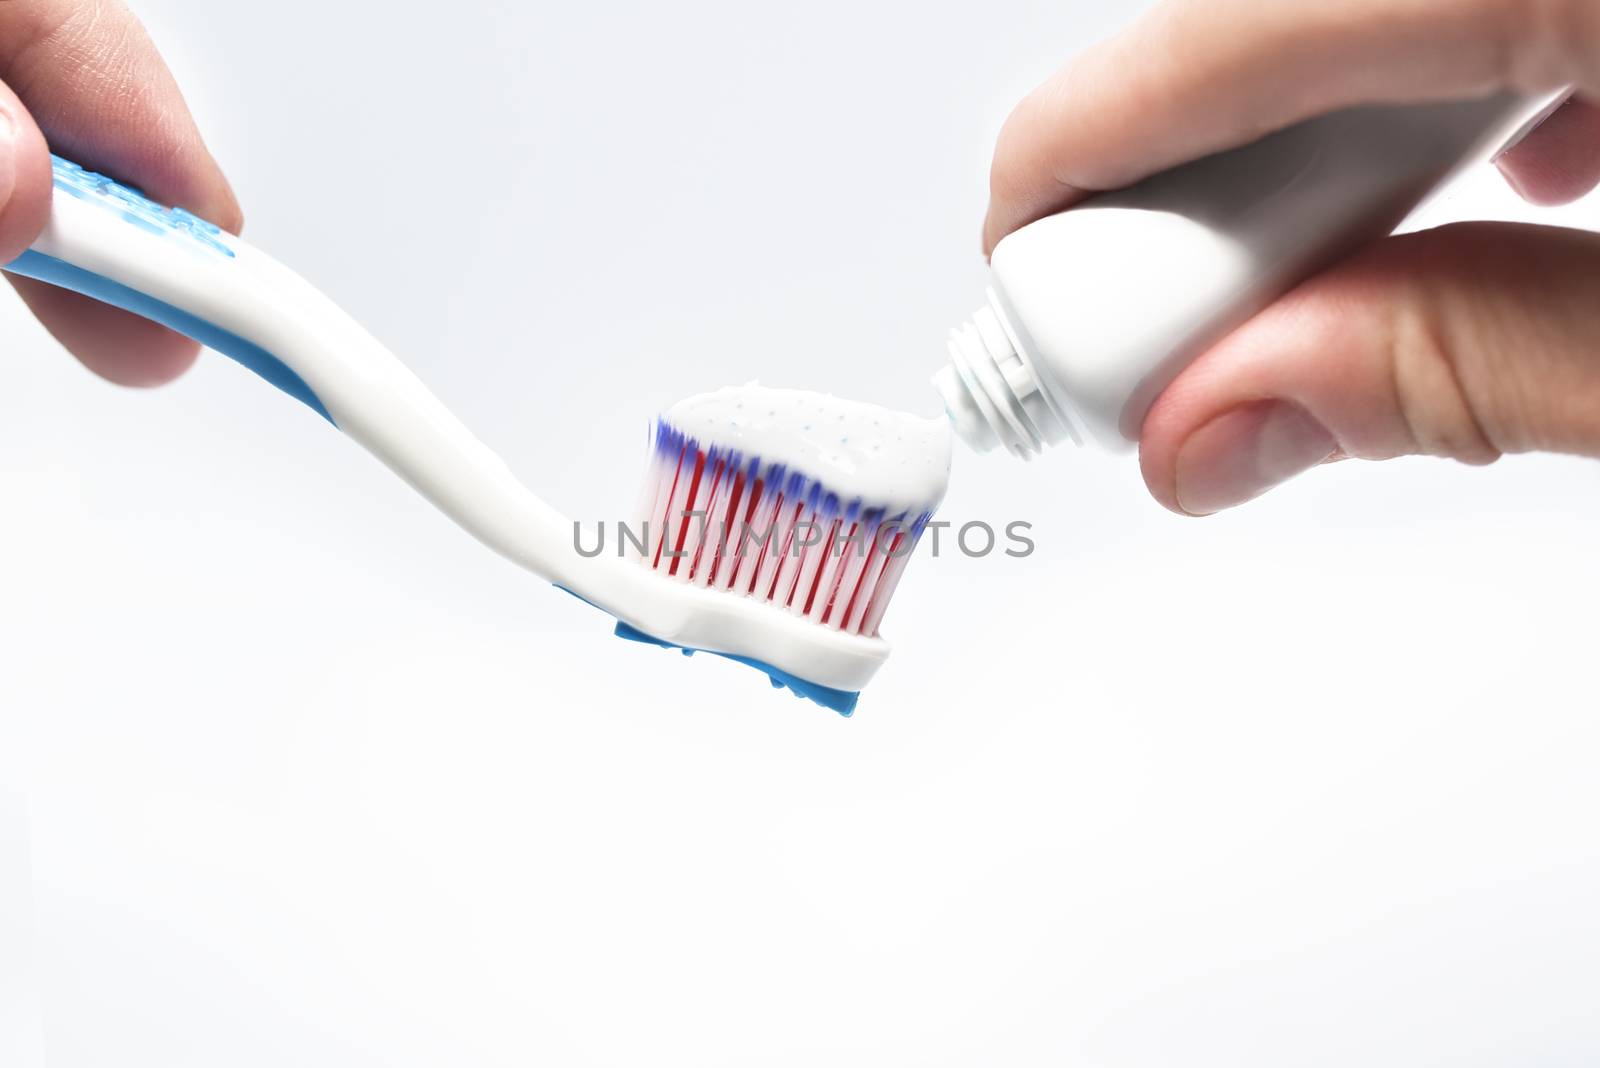 Fresh toothpaste and toothbrush in the male hands, isolated on white background. healthcare concept by Nickstock